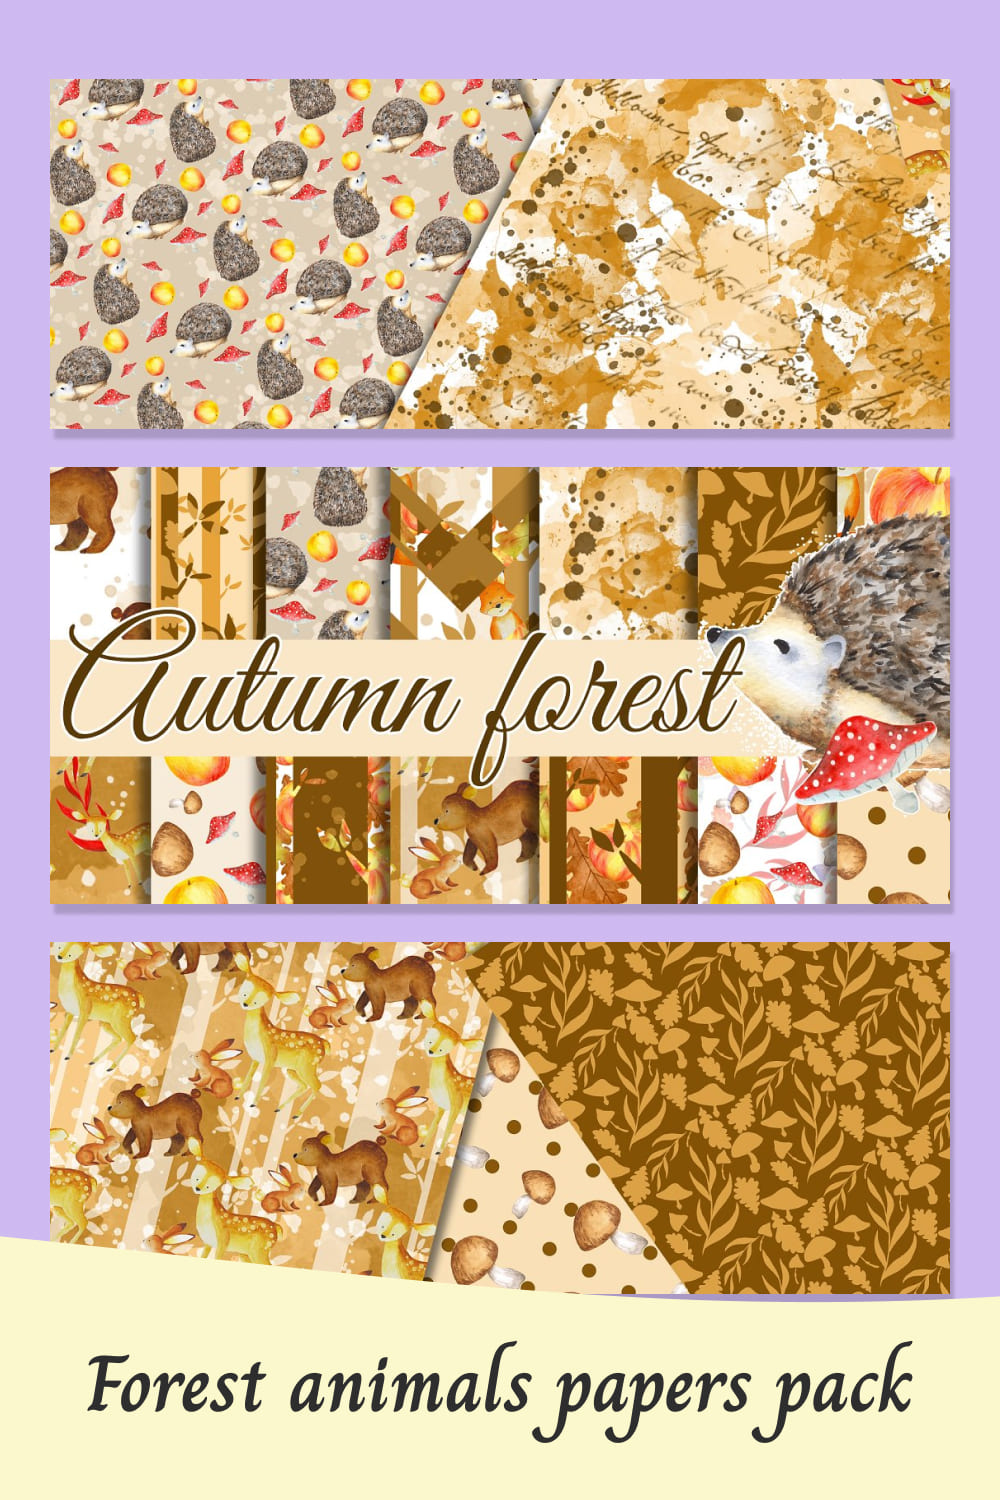 Forest Animals Papers Pack 04.